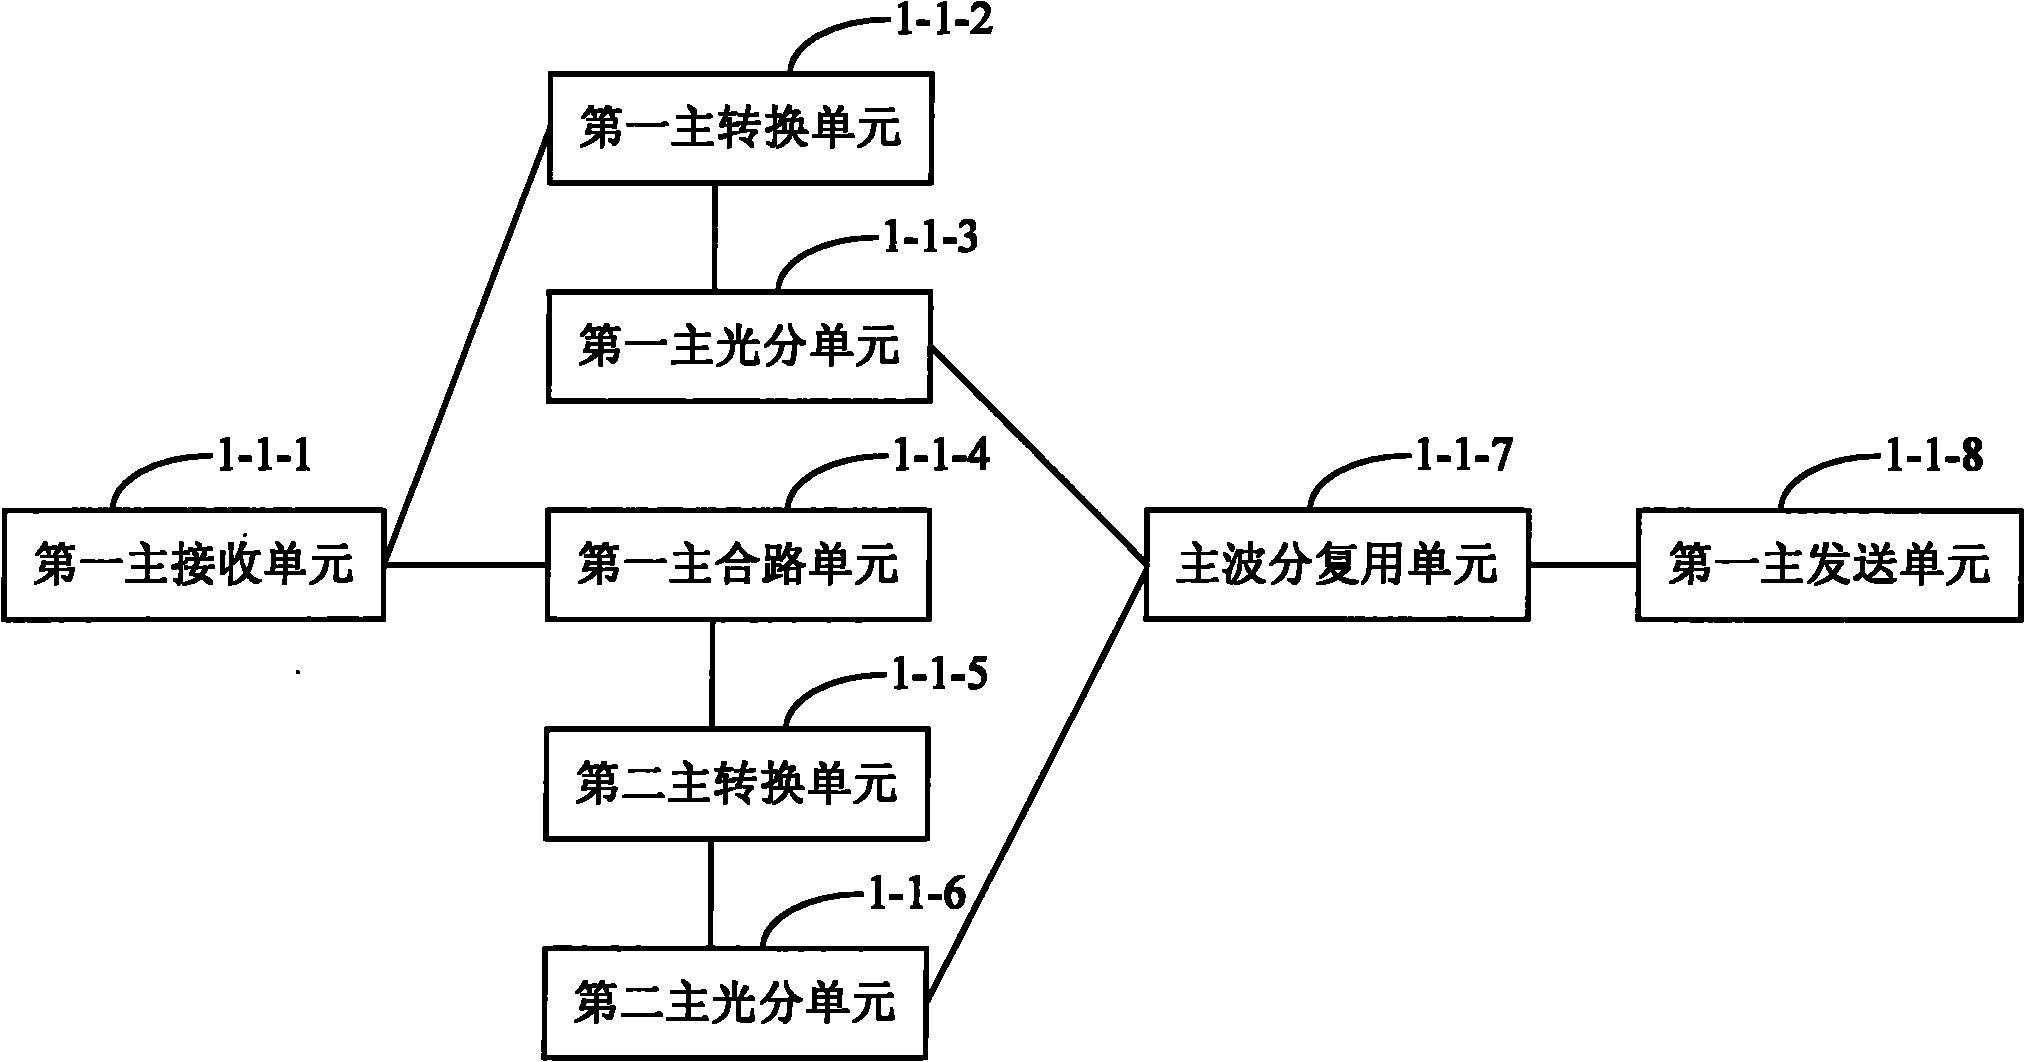 Main device for wireless communication multi-network integration, expansion device and remote device